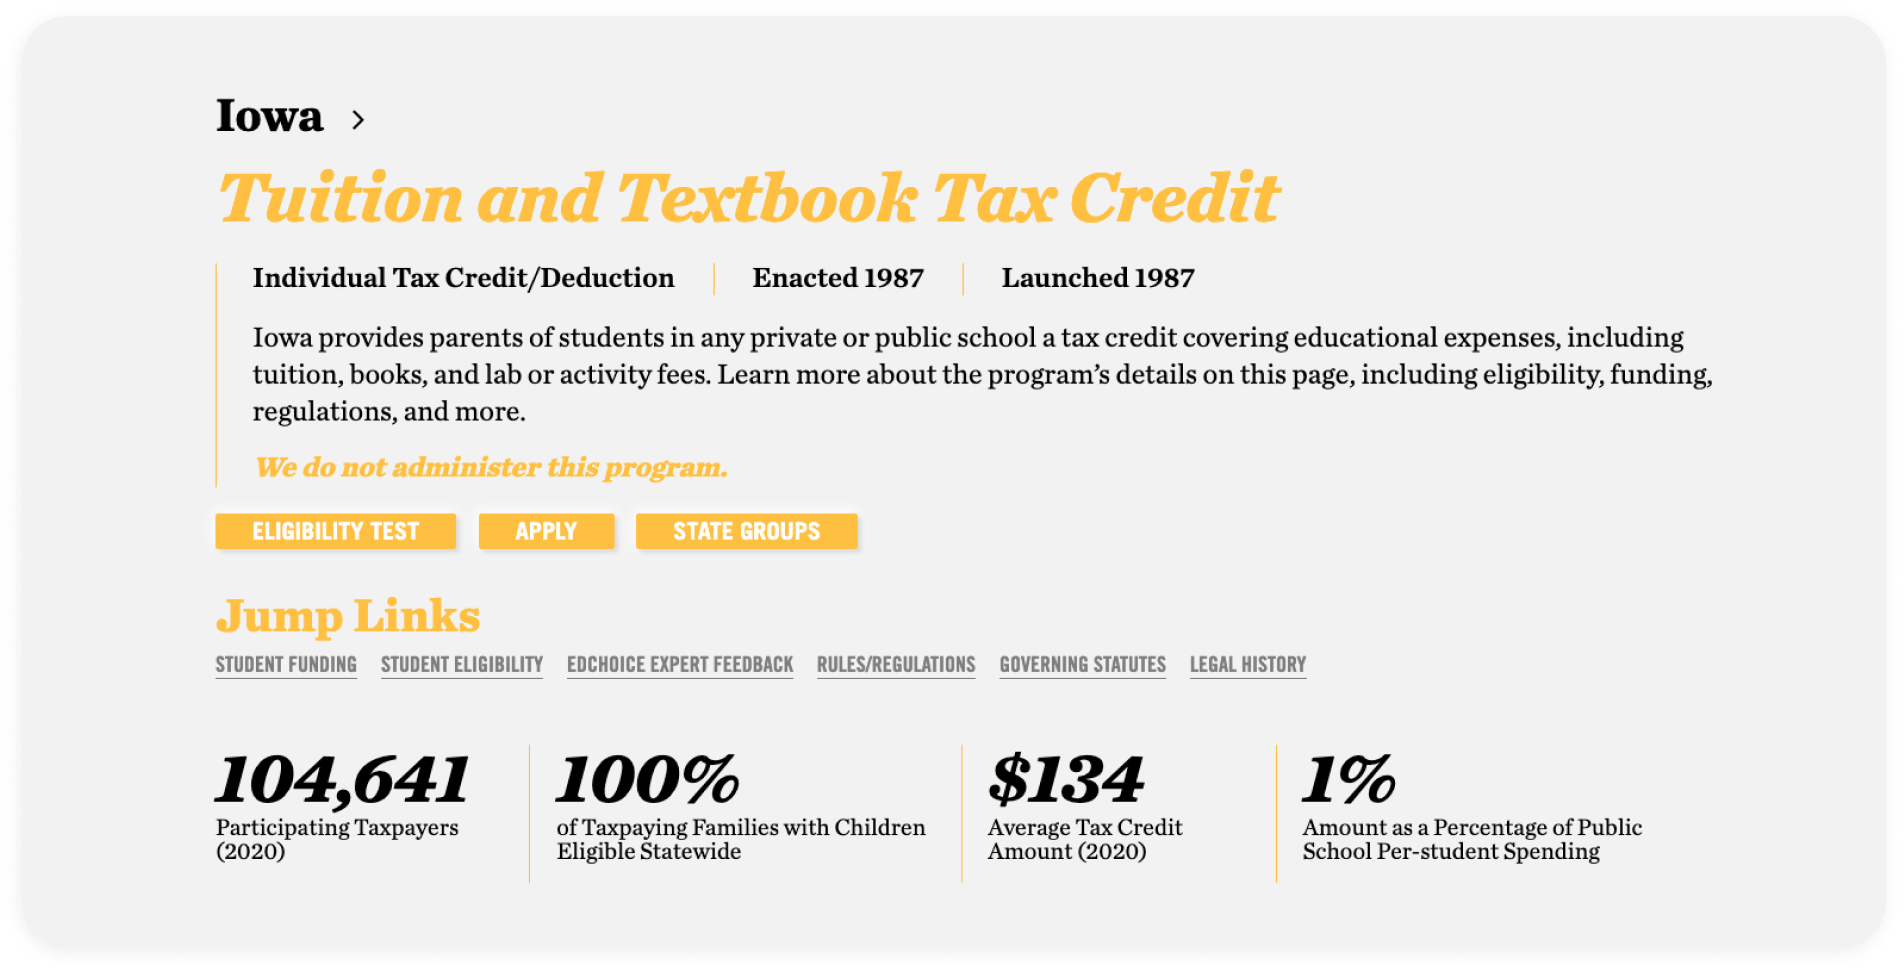 Screenshot of Iowa Tuition and Textbook Tax Credit page from EdChoice